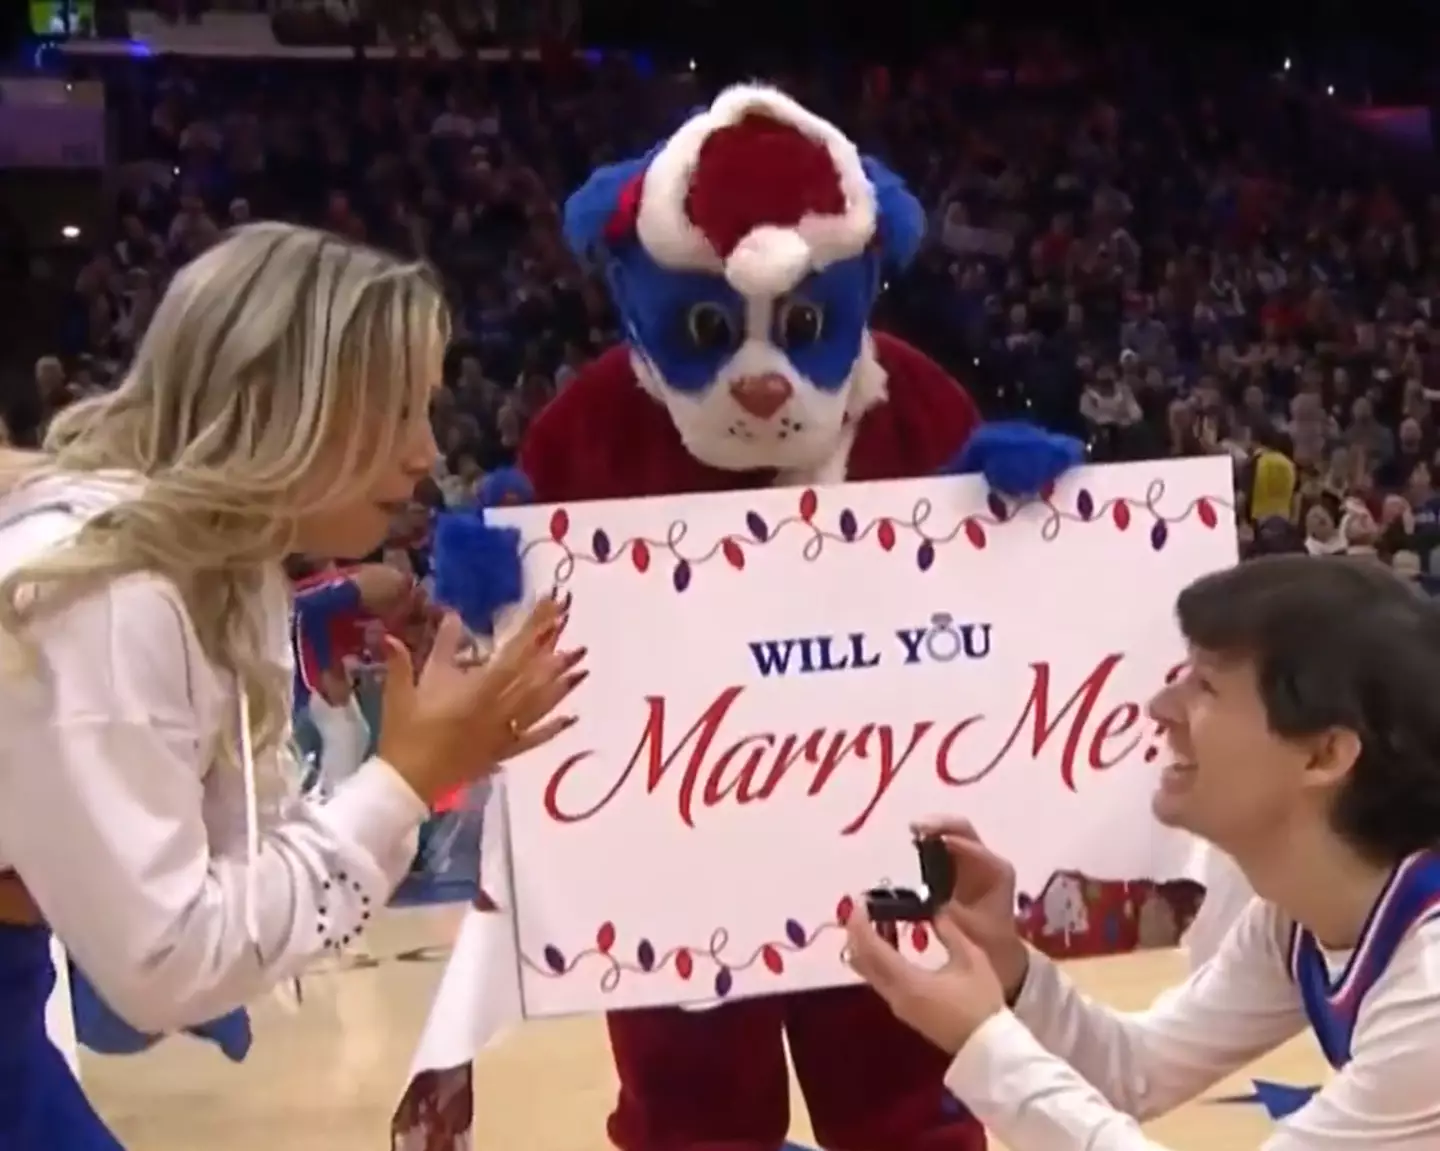 The man shocked his girlfriend with a proposal.